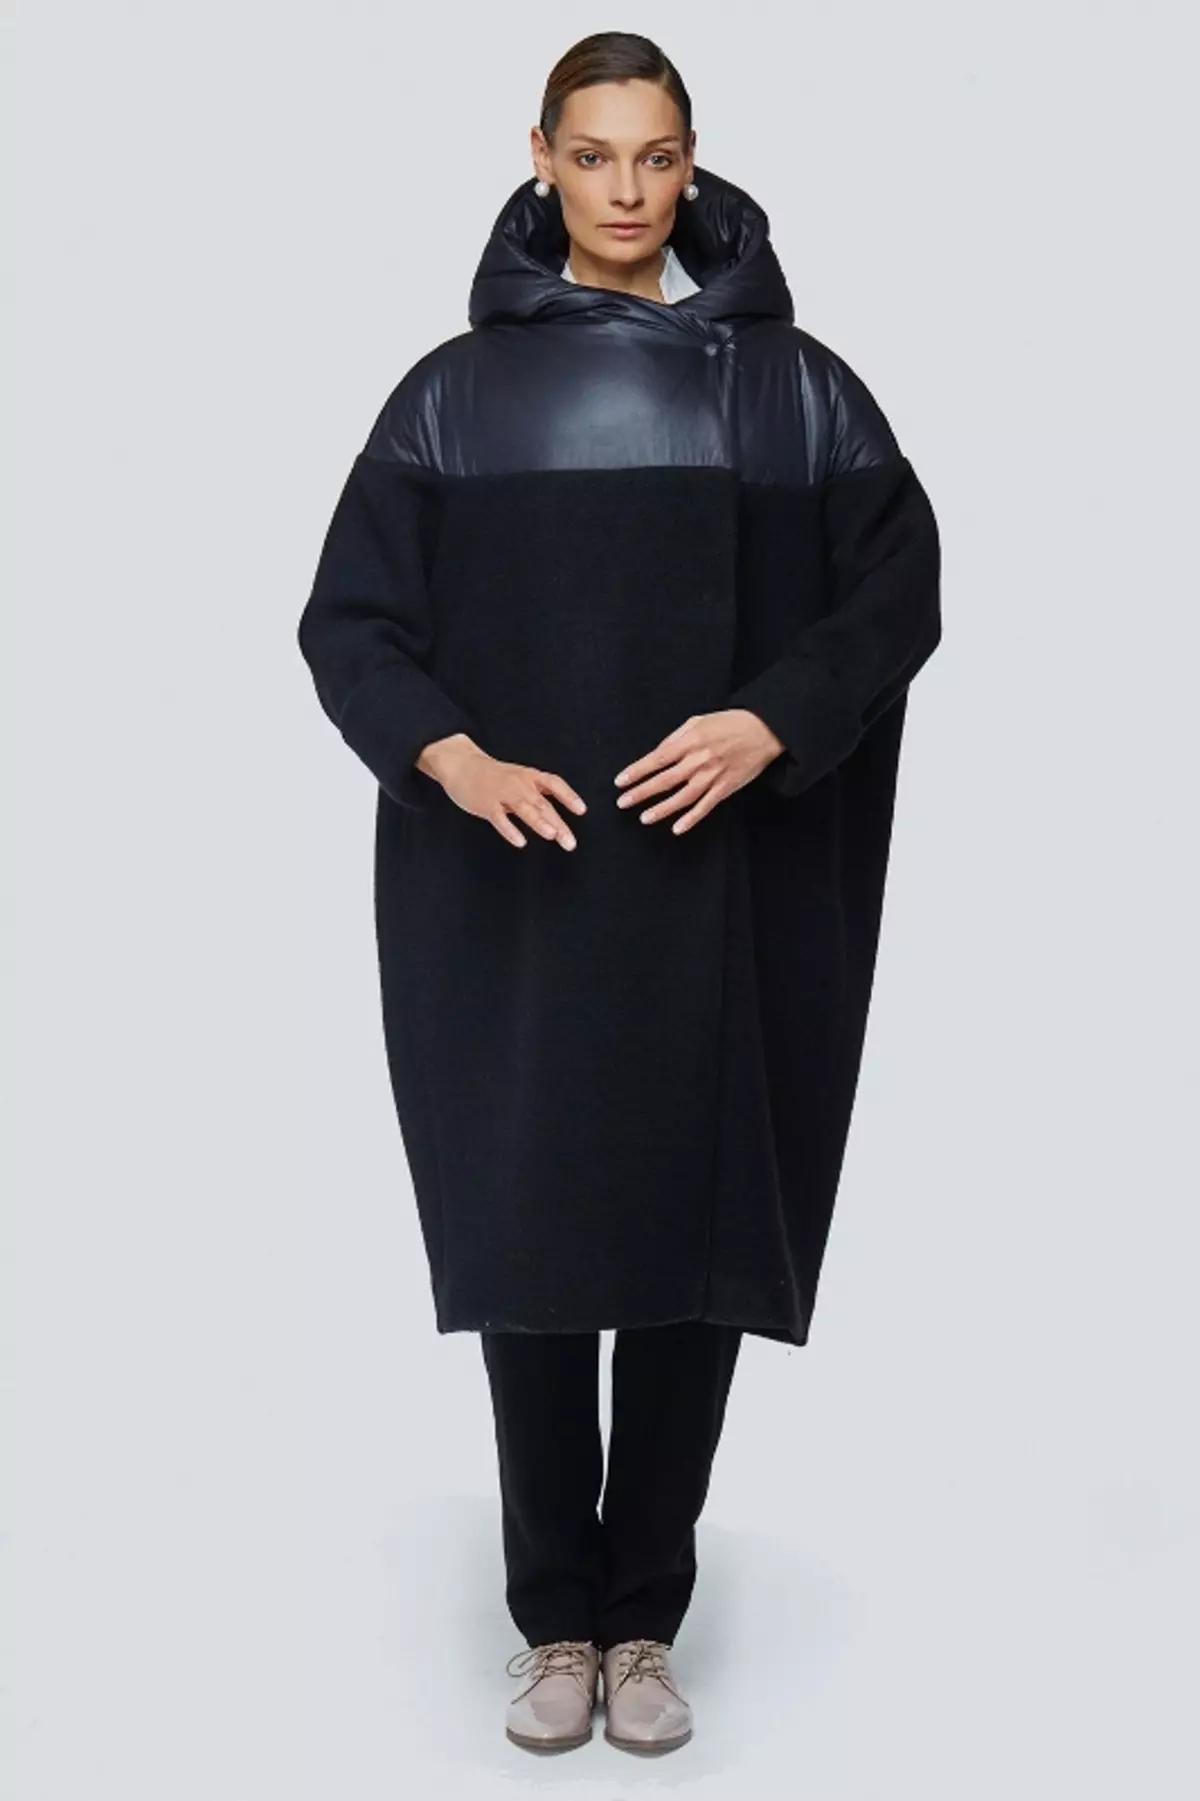 Combined Coat (45 Photos): Women's Models of 2 Fabrics and With A Cloak 376_21